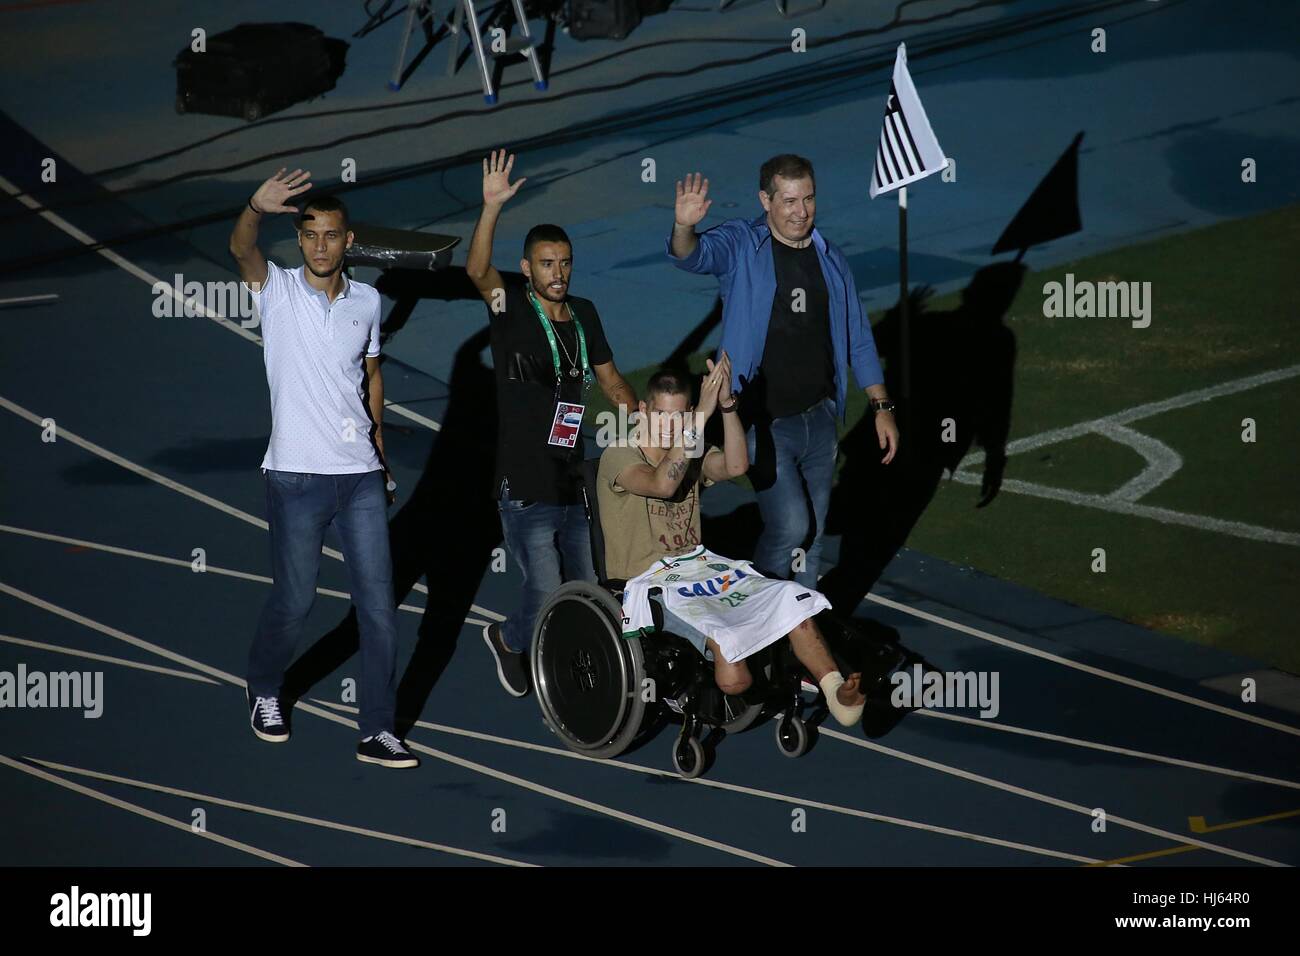 Rio De Janeiro, Brazil. 25th Jan, 2017. Brazilian Chapecoense footballers Alan Ruschel (2nd L), Neto (1st L) and Jackson Follmann (2nd R), and journalist Rafael Henzel (1st R), survivors of the LaMia airplane crash in Colombia, enter the pitch before a friendly match between Brazil and Columbia at the Engenhao Stadium in Rio de Janeiro, Brazil, Jan. 25, 2017. All the net income of the match will be passed on to the Chapecoense Football Association. Credit: Li Ming/Xinhua/Alamy Live News Stock Photo